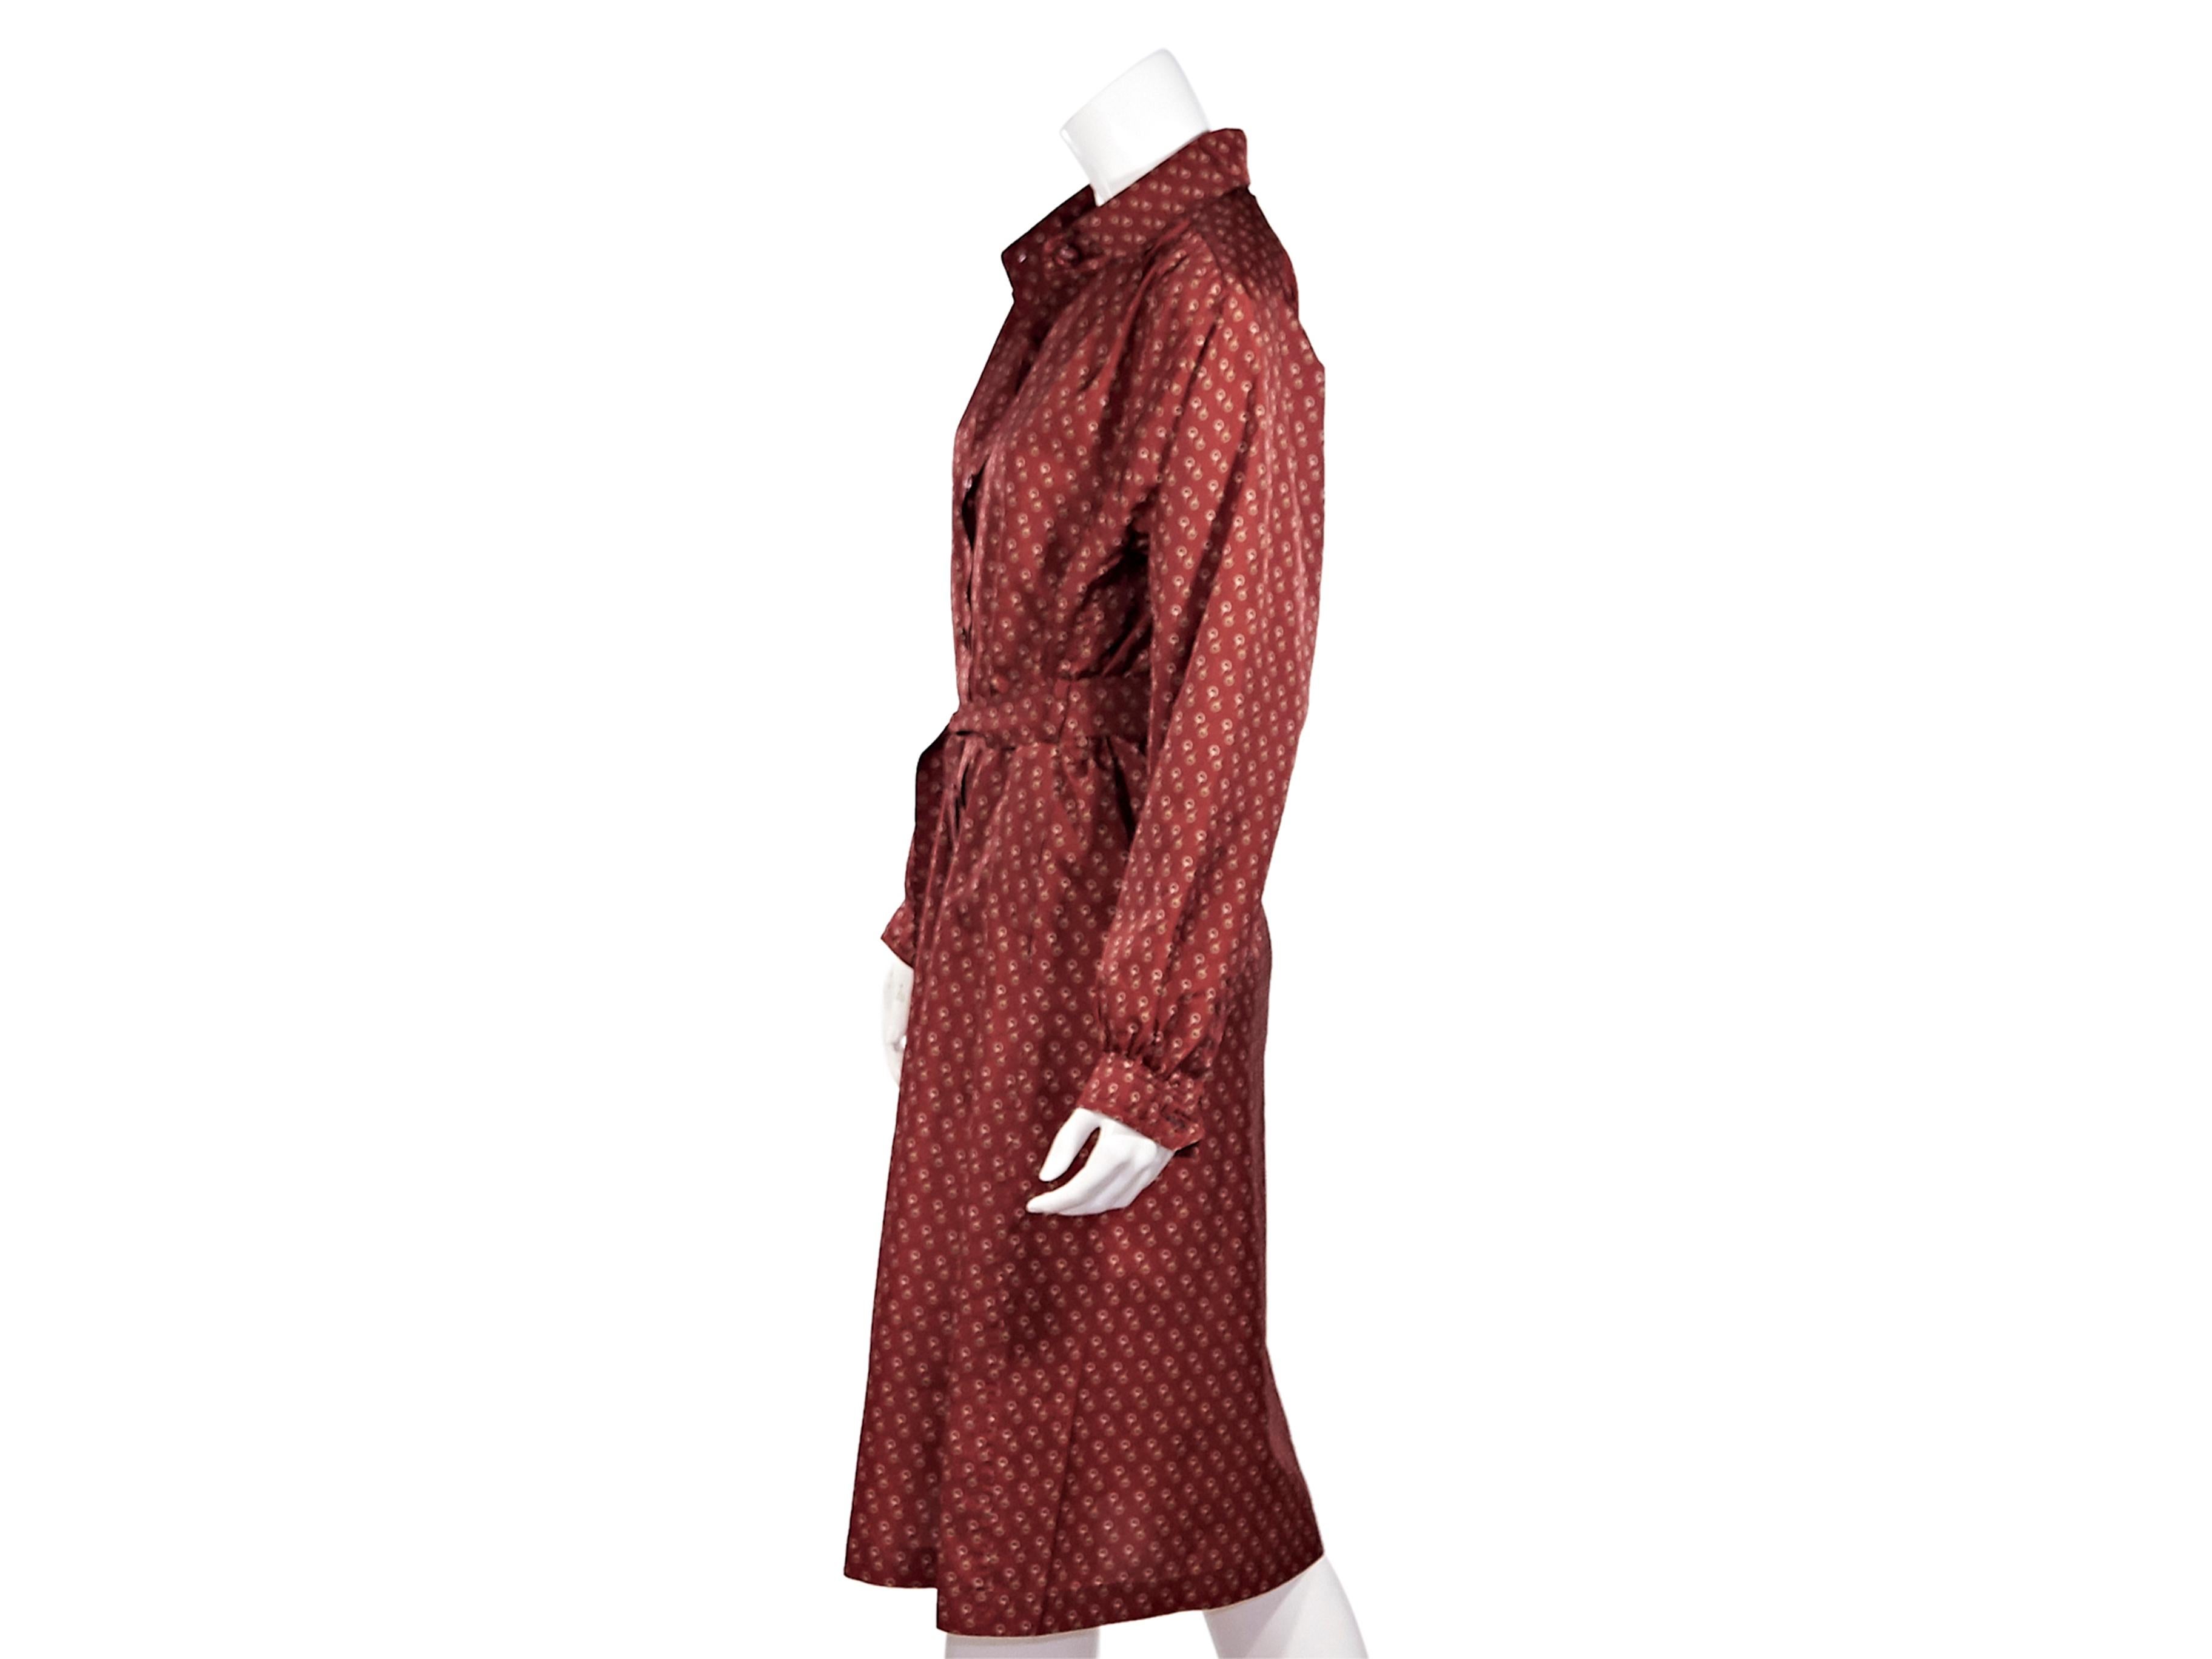 Product details:  Vintage red horsebit-printed shirtdress by Gucci.  Spread collar.  Long sleeves.  Button-front closure.  Self-tie belted waist.  Label size IT 46.  38